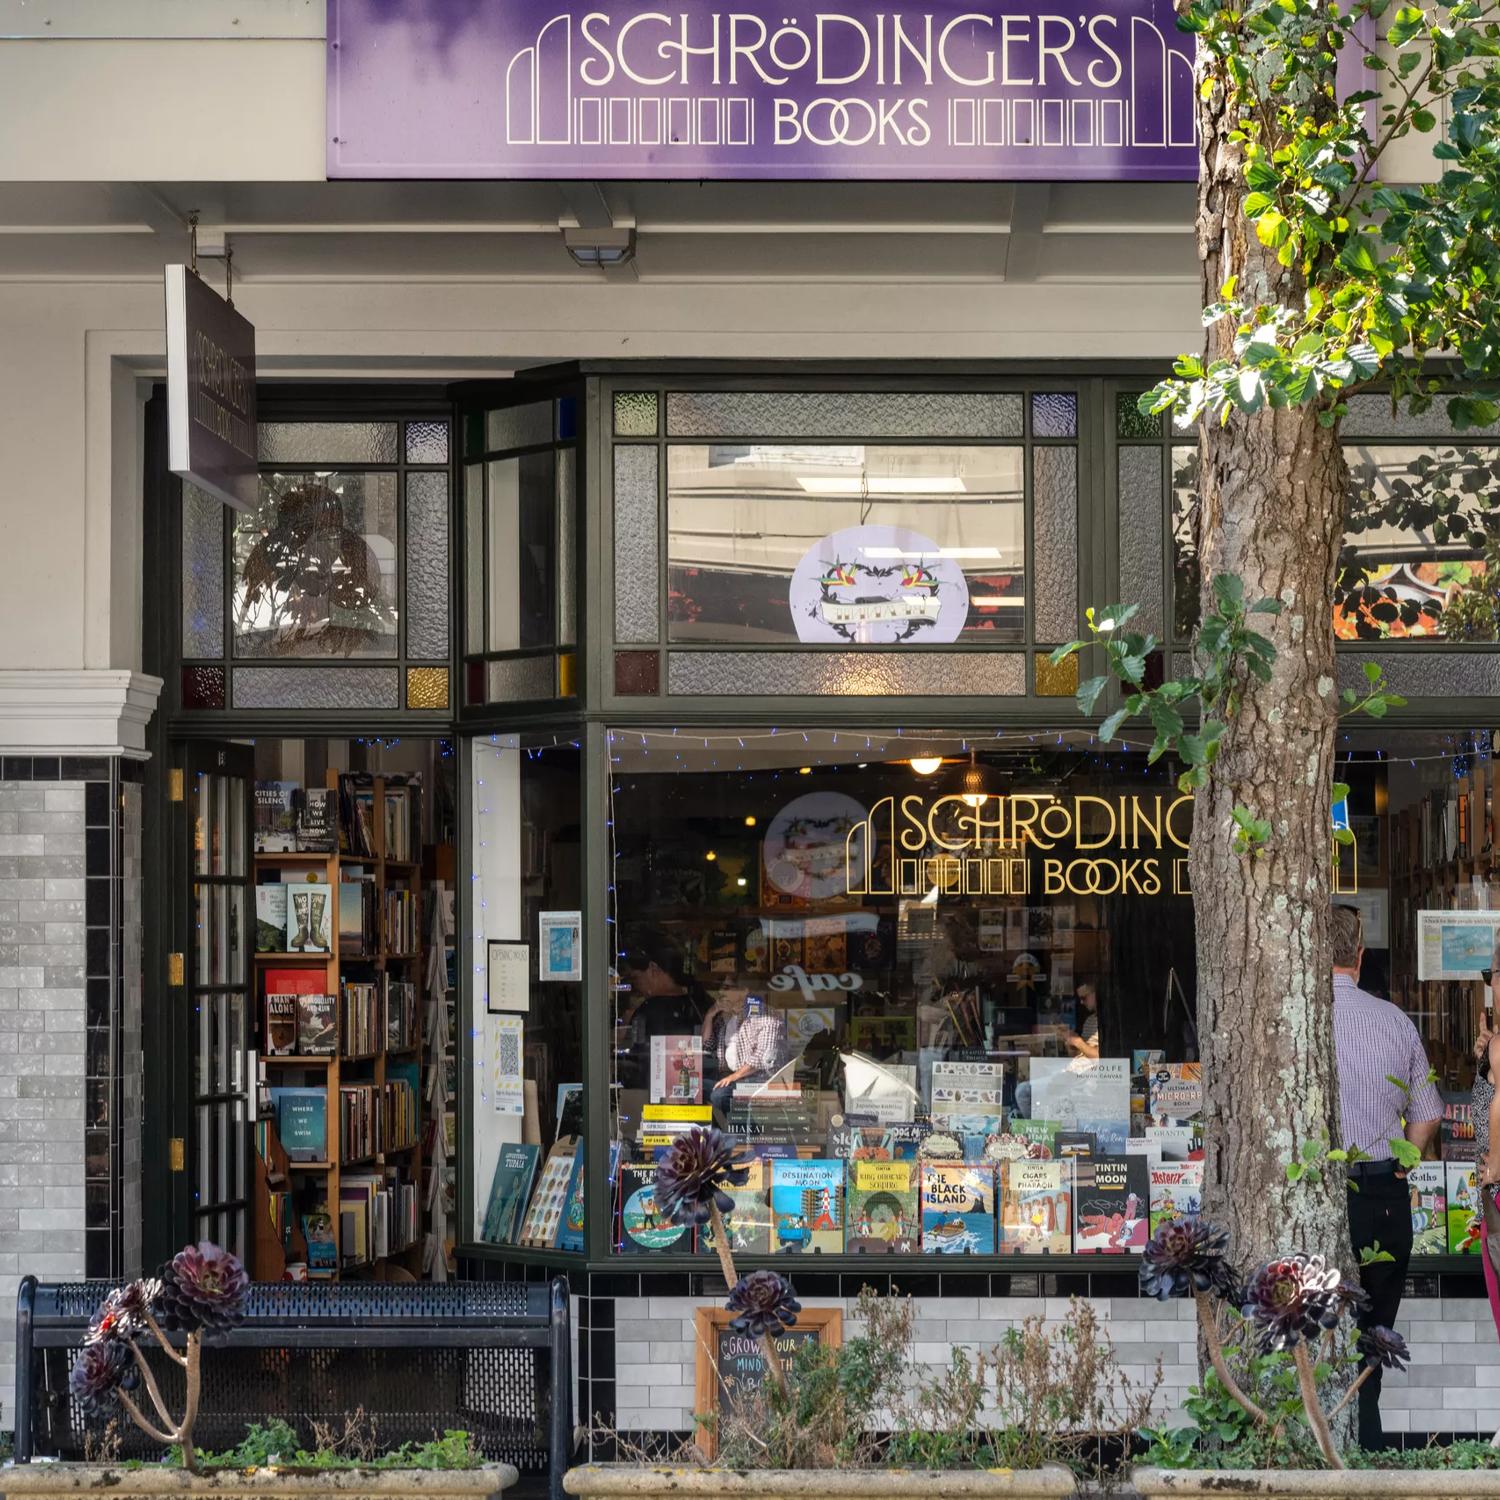 The exterior of Schrodingers books, with a vintage feel and a tree outside, as well as their purple sign above the shop. Books are displayed in the bay window.